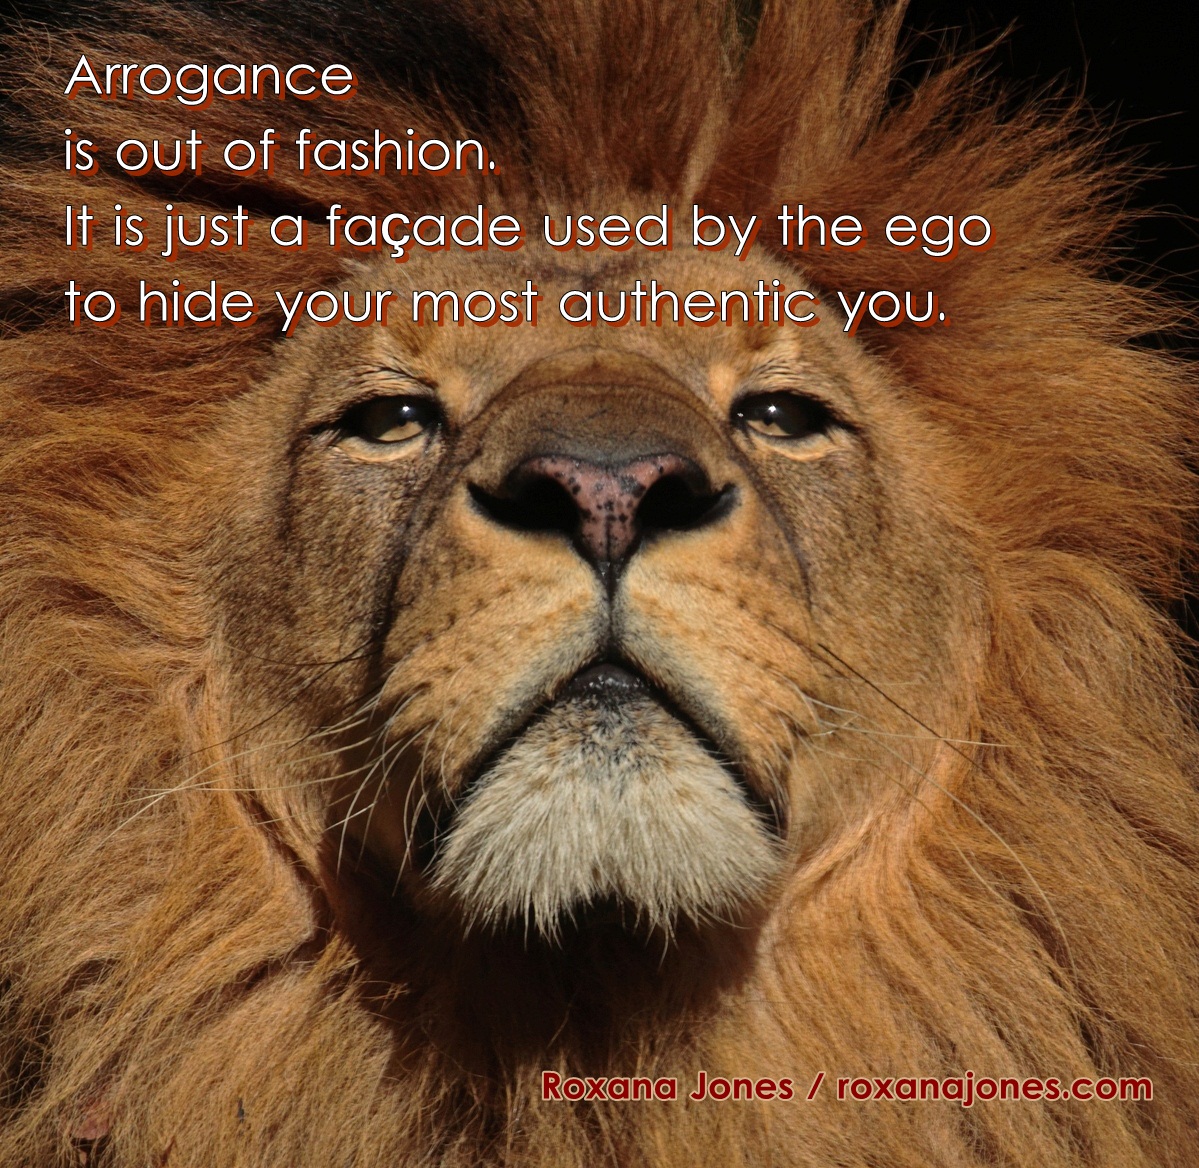 Arrogance is out of fashion, it is just a façade used by the ego to hide your most authentic you. Roxana Jones